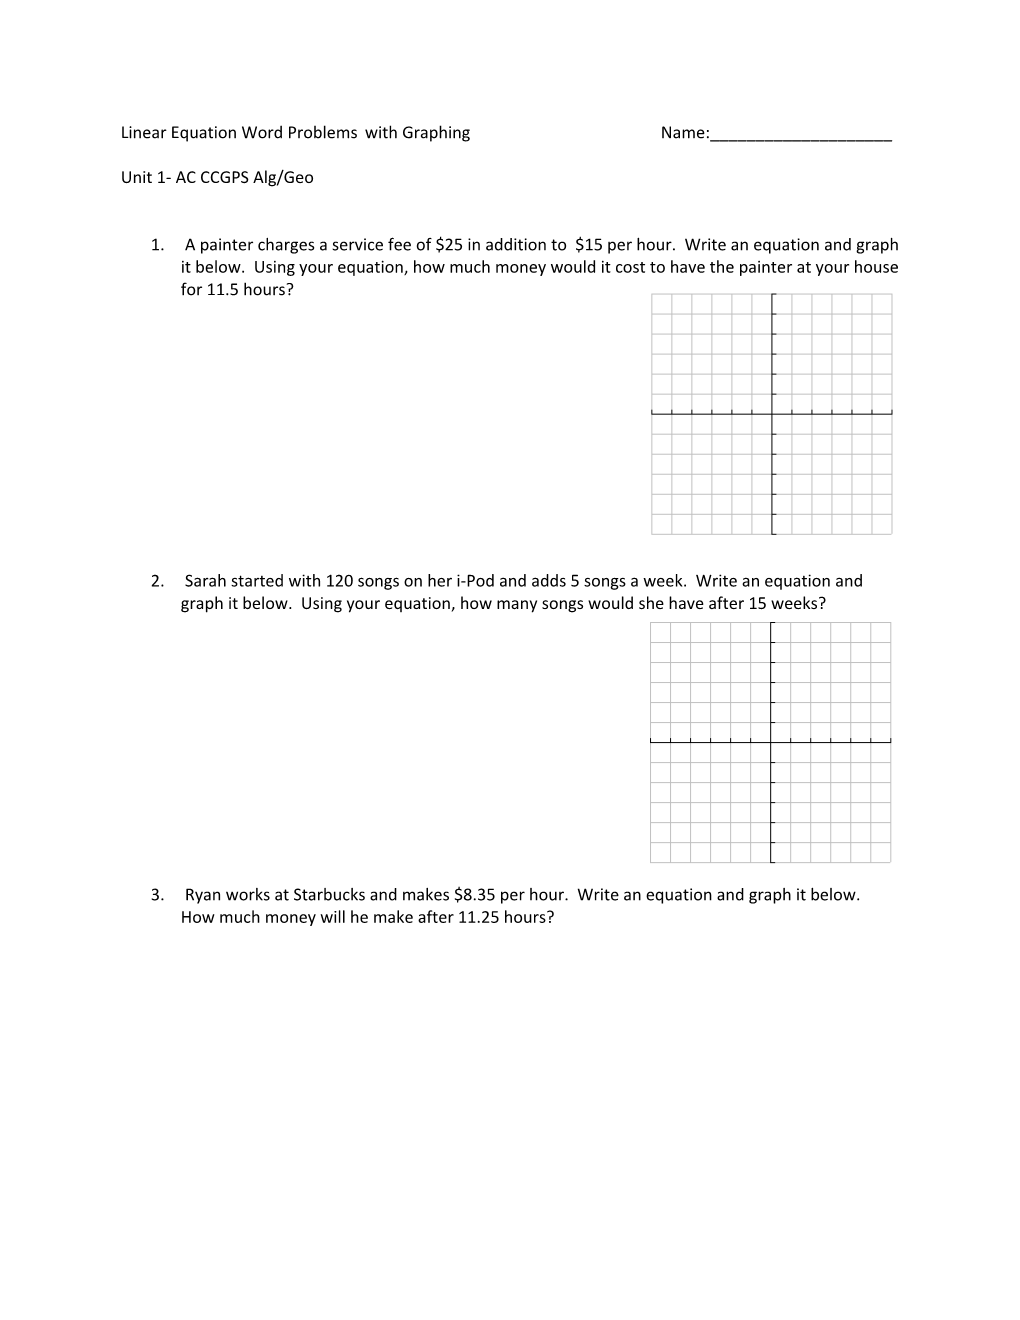 Linear Equation Word Problems with Graphingname:______